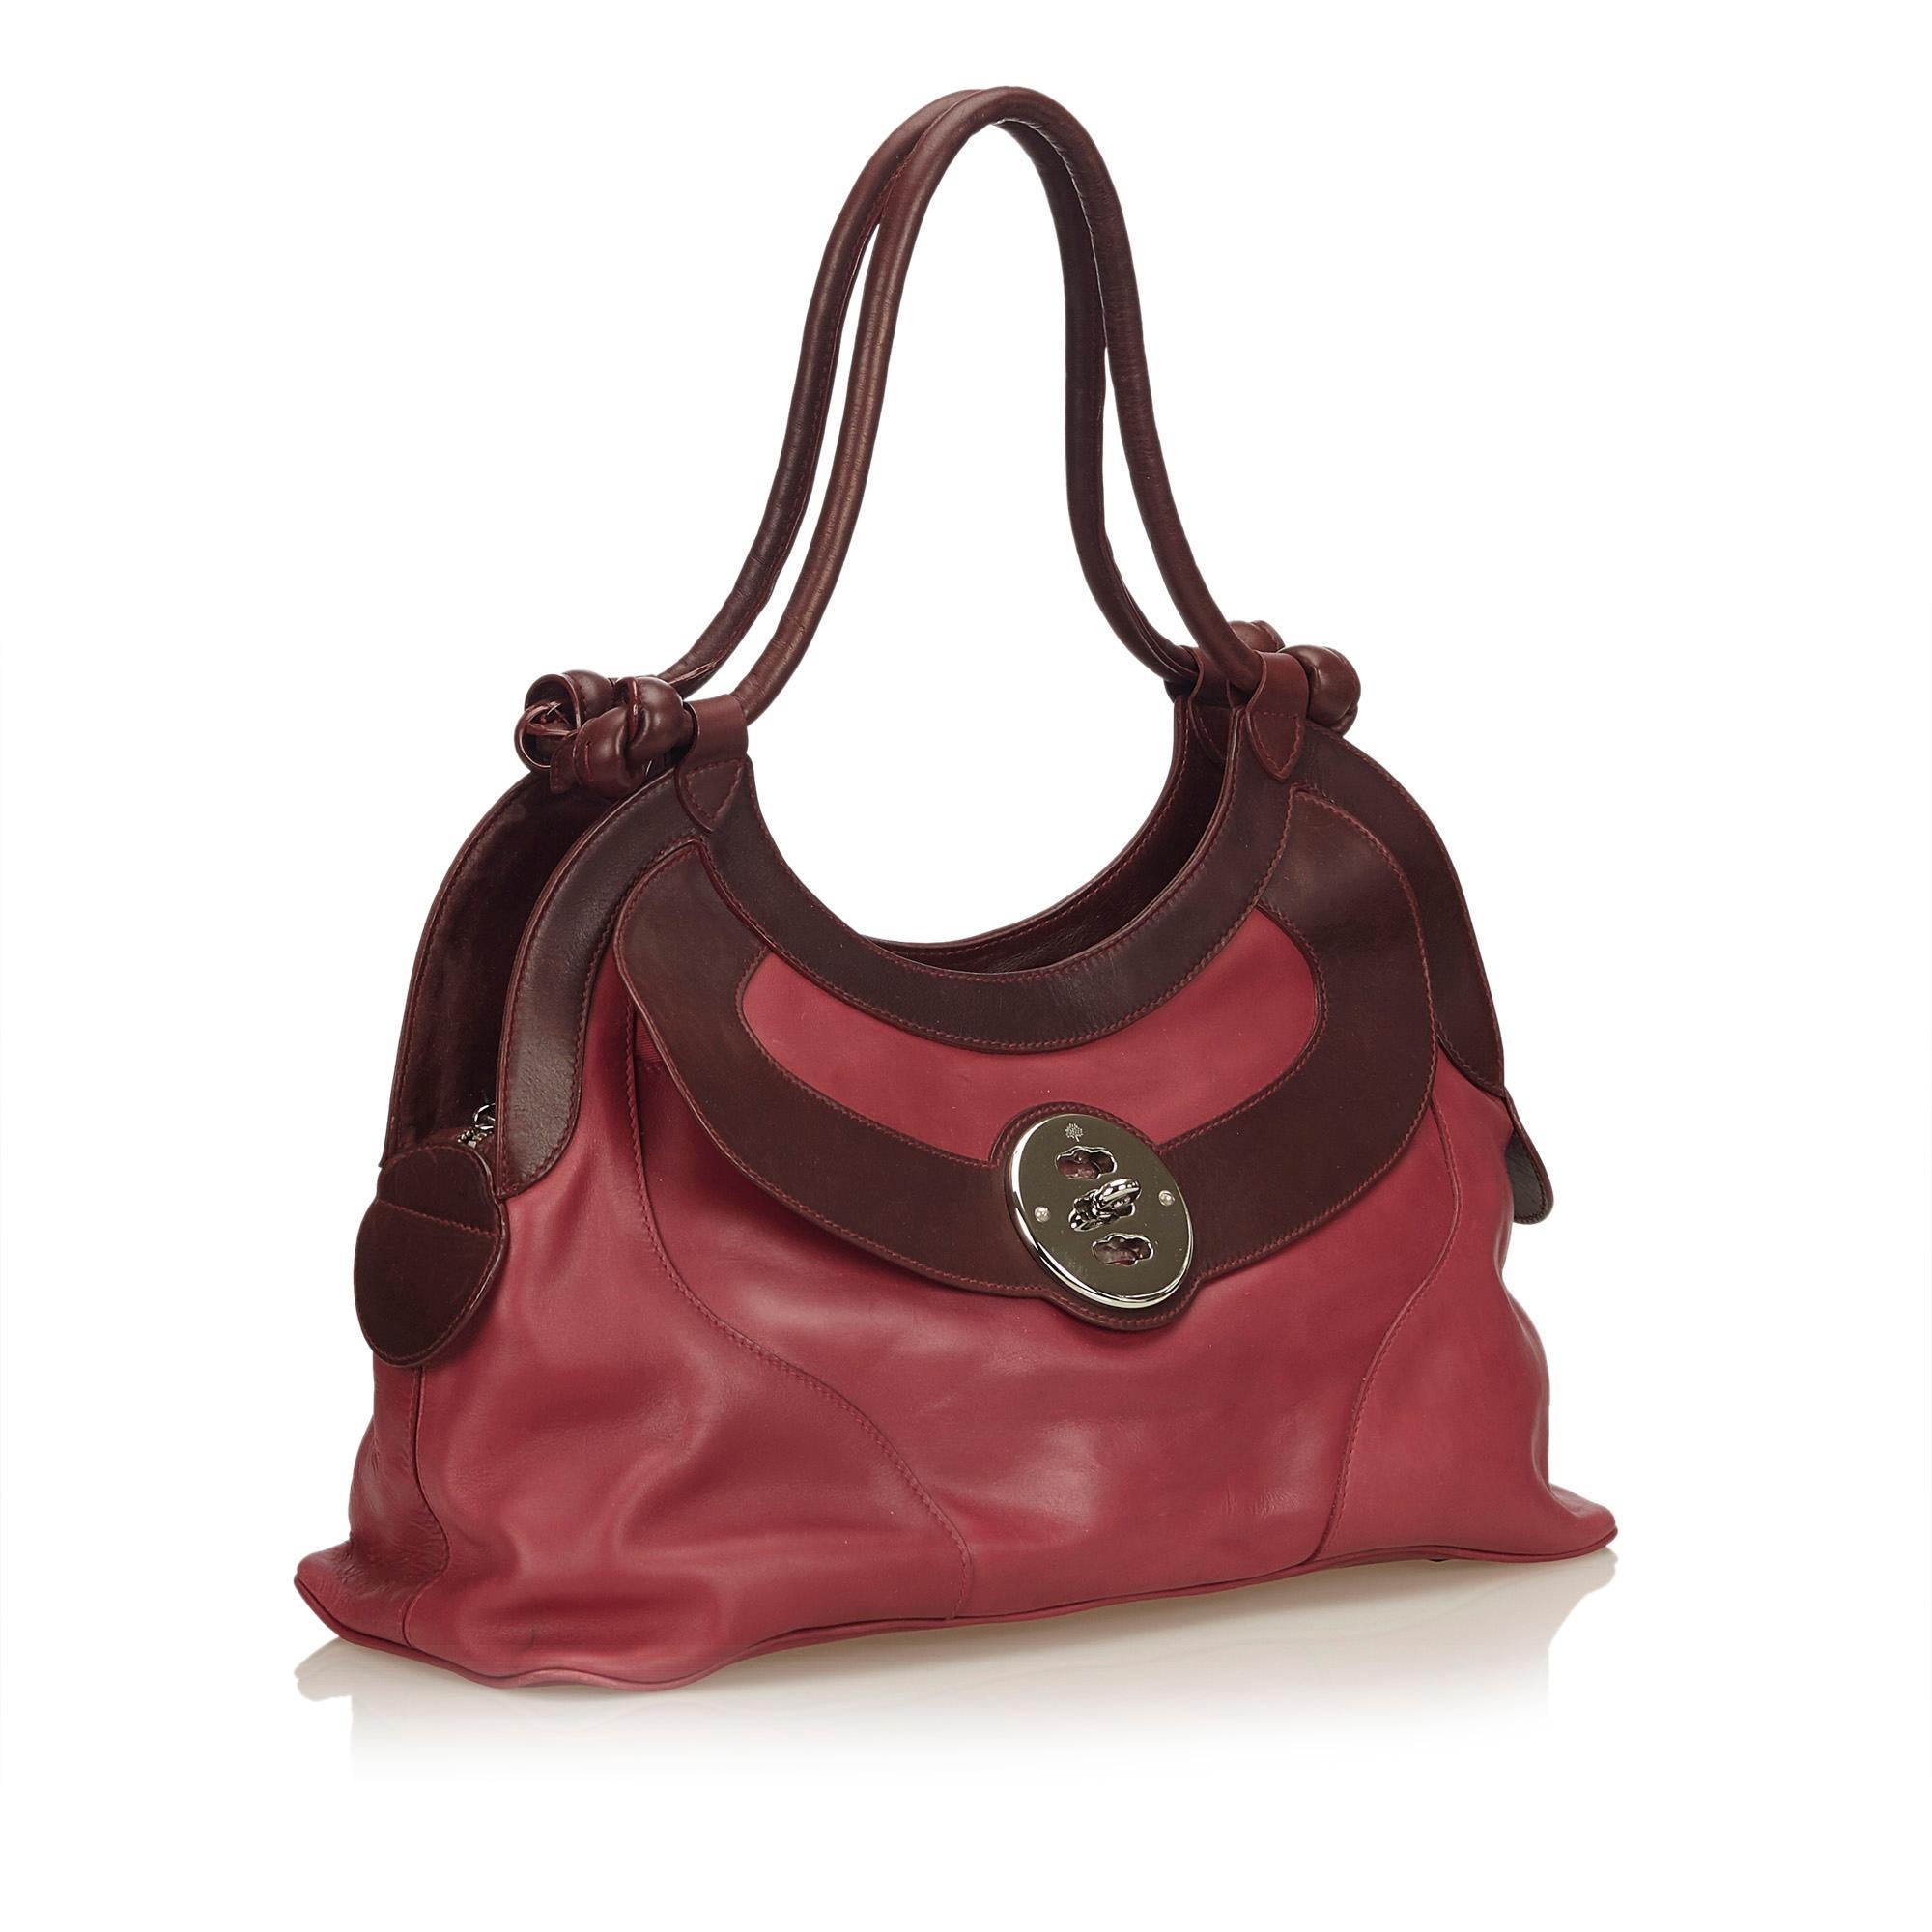 This shoulder bag features a leather body, rolled leather straps, top zip closure, exterior flap pocket with twist lock closure, and interior pockets. It carries as B+ condition rating.

Inclusions: 
Dust Bag

Dimensions:
Length: 22.00 cm
Width: